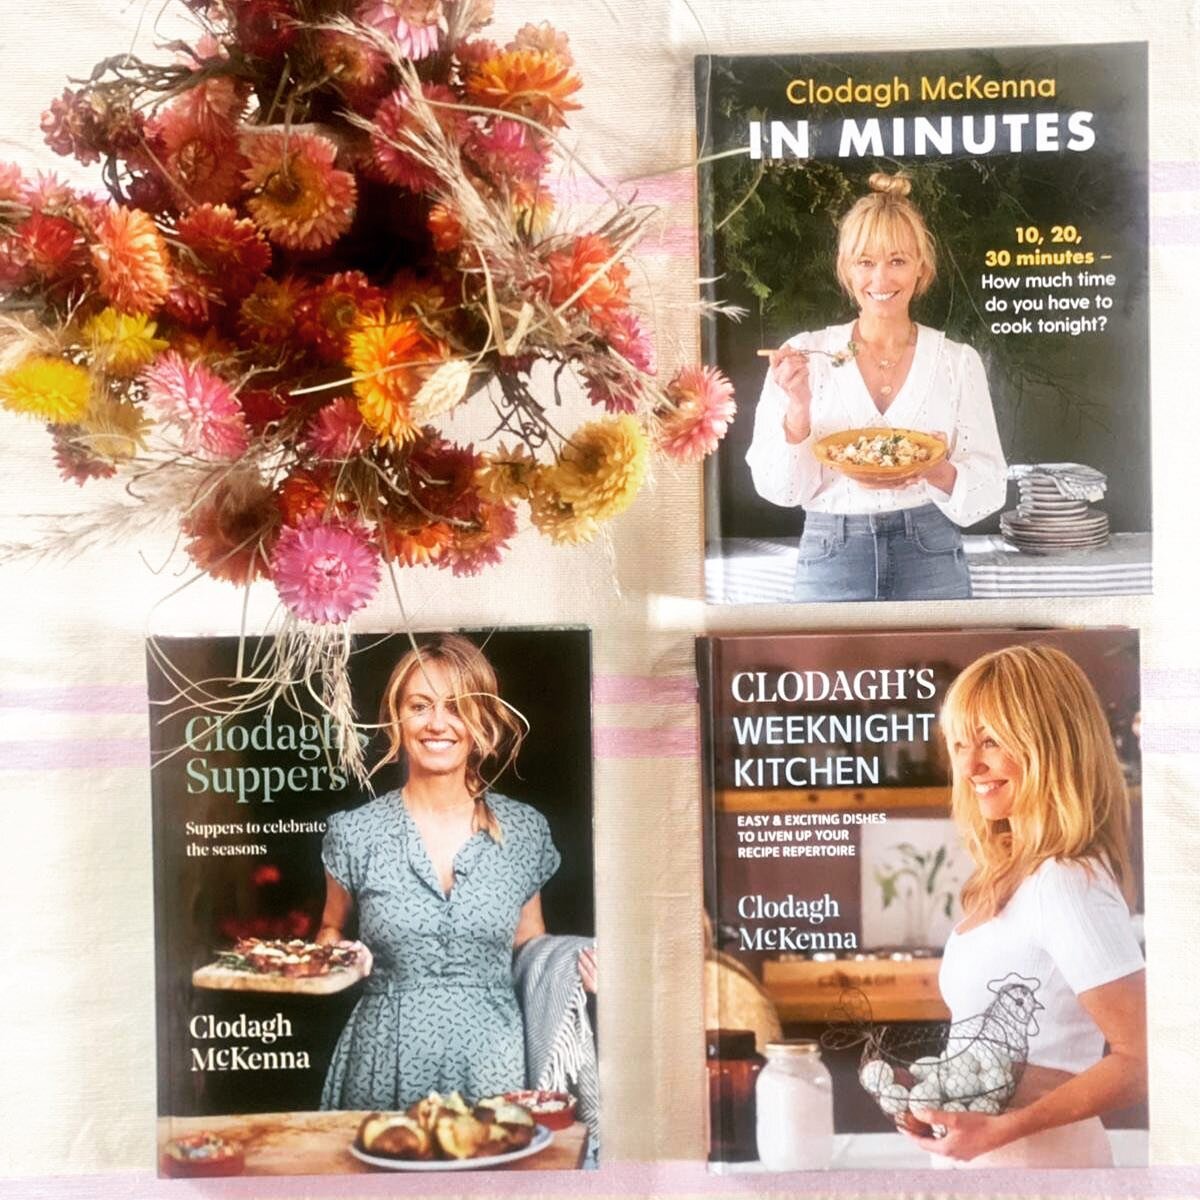 My Cookbook Collection! 

Would you like a personalised signed copy of my latest 3 cook books? You can order via the shop link here or go to my shop (link via my profile).

📚 UK Amazon #1 Best Seller - In Minutes 
📚 Clodagh&rsquo;s Suppers 
📚 Clod